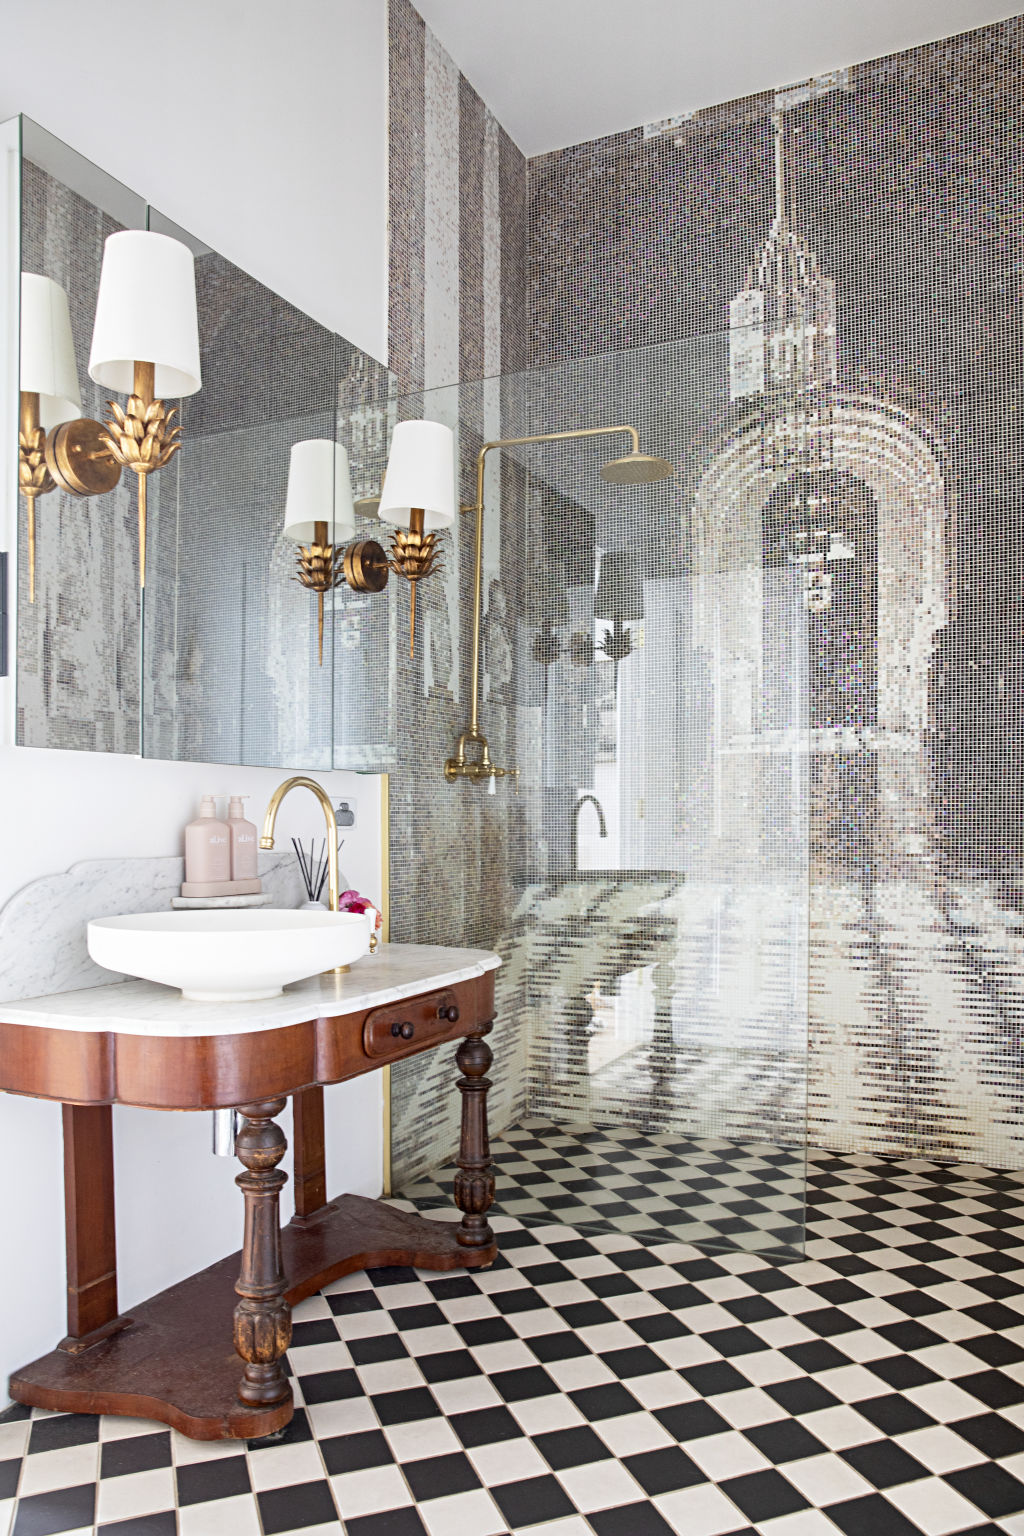 The showstopper second-level bathroom transports you straight to Versailles. Photo: Natalie Jeffcott